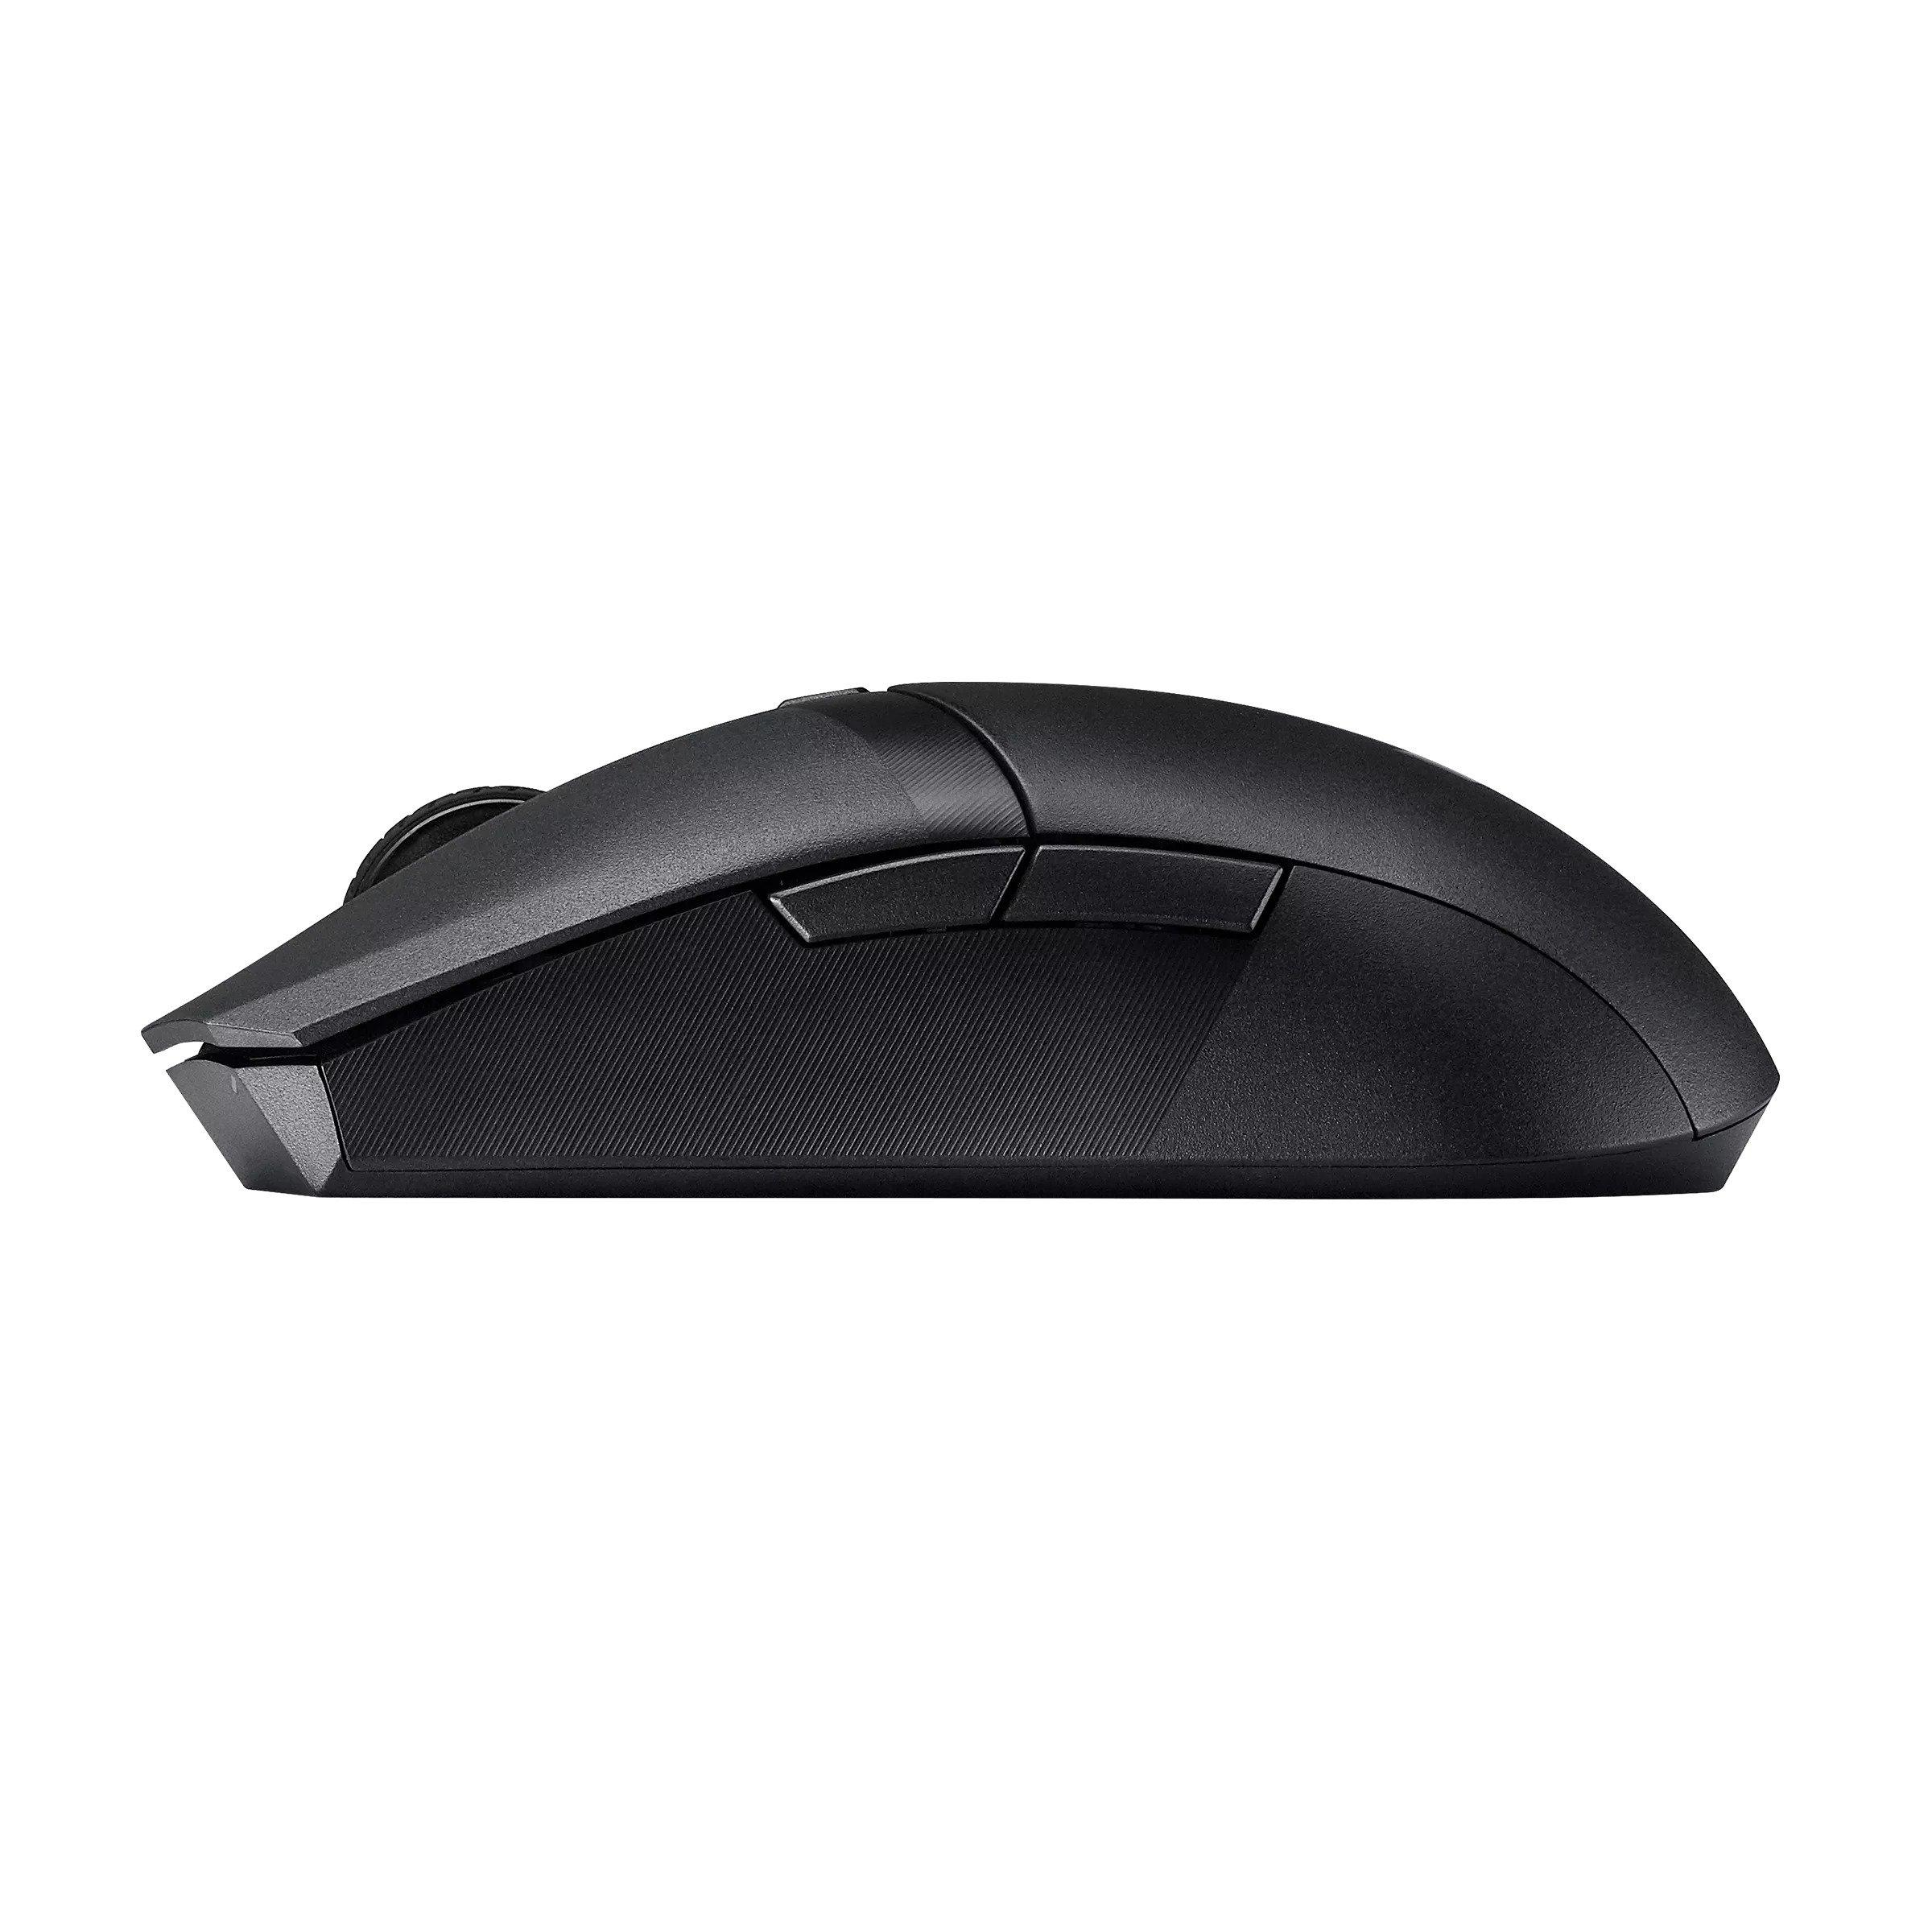 ASUS TUF M4 WIRELESS 12000 DPI MOUSE